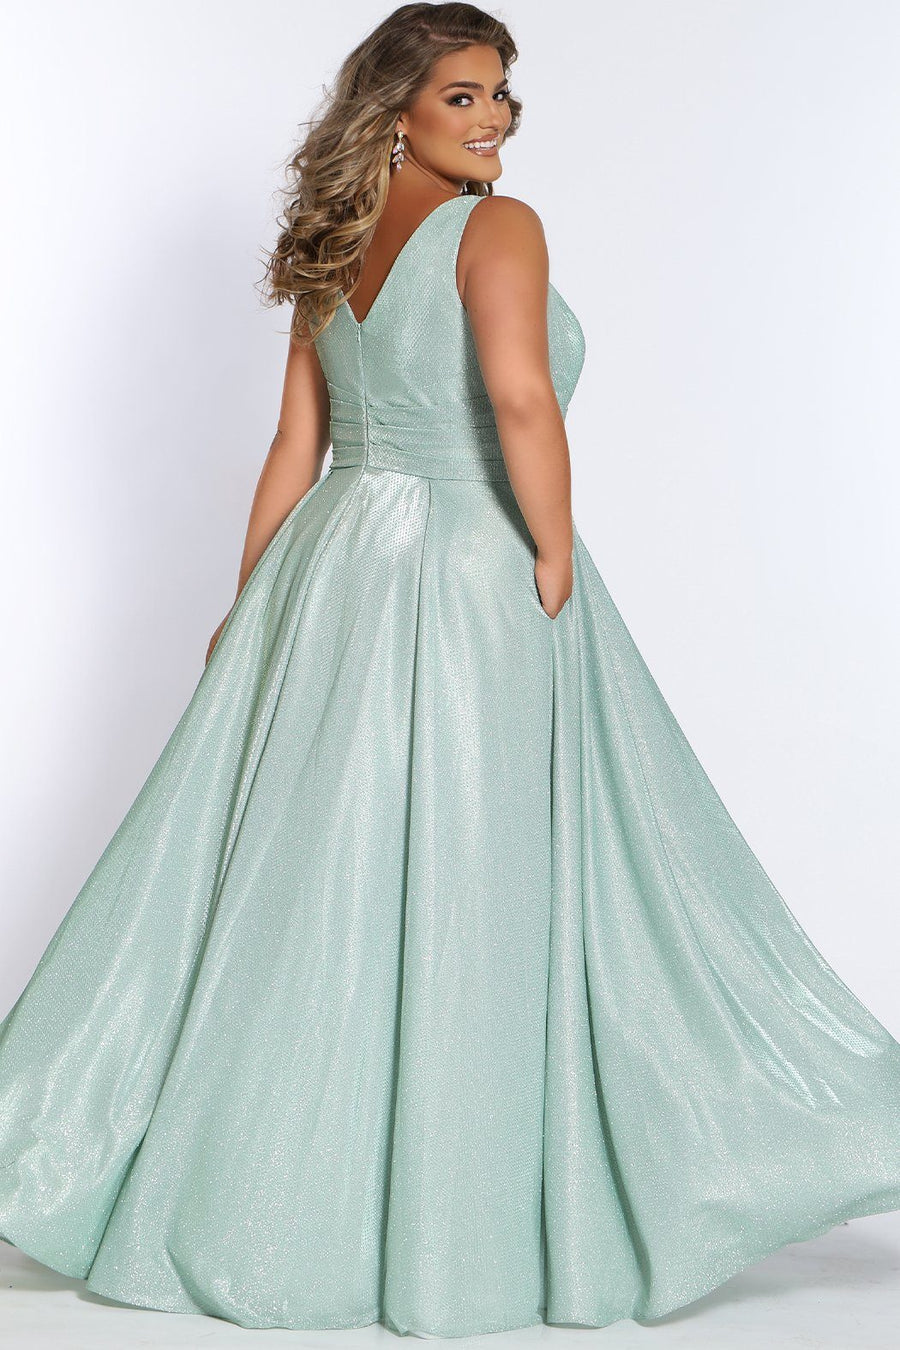 SC7324 Sydney's Prom by Sydney's Closet aline prom dress with v neckline and bra friendly straps shimmer metallic fabric with zipper back available in capri orchid and sage